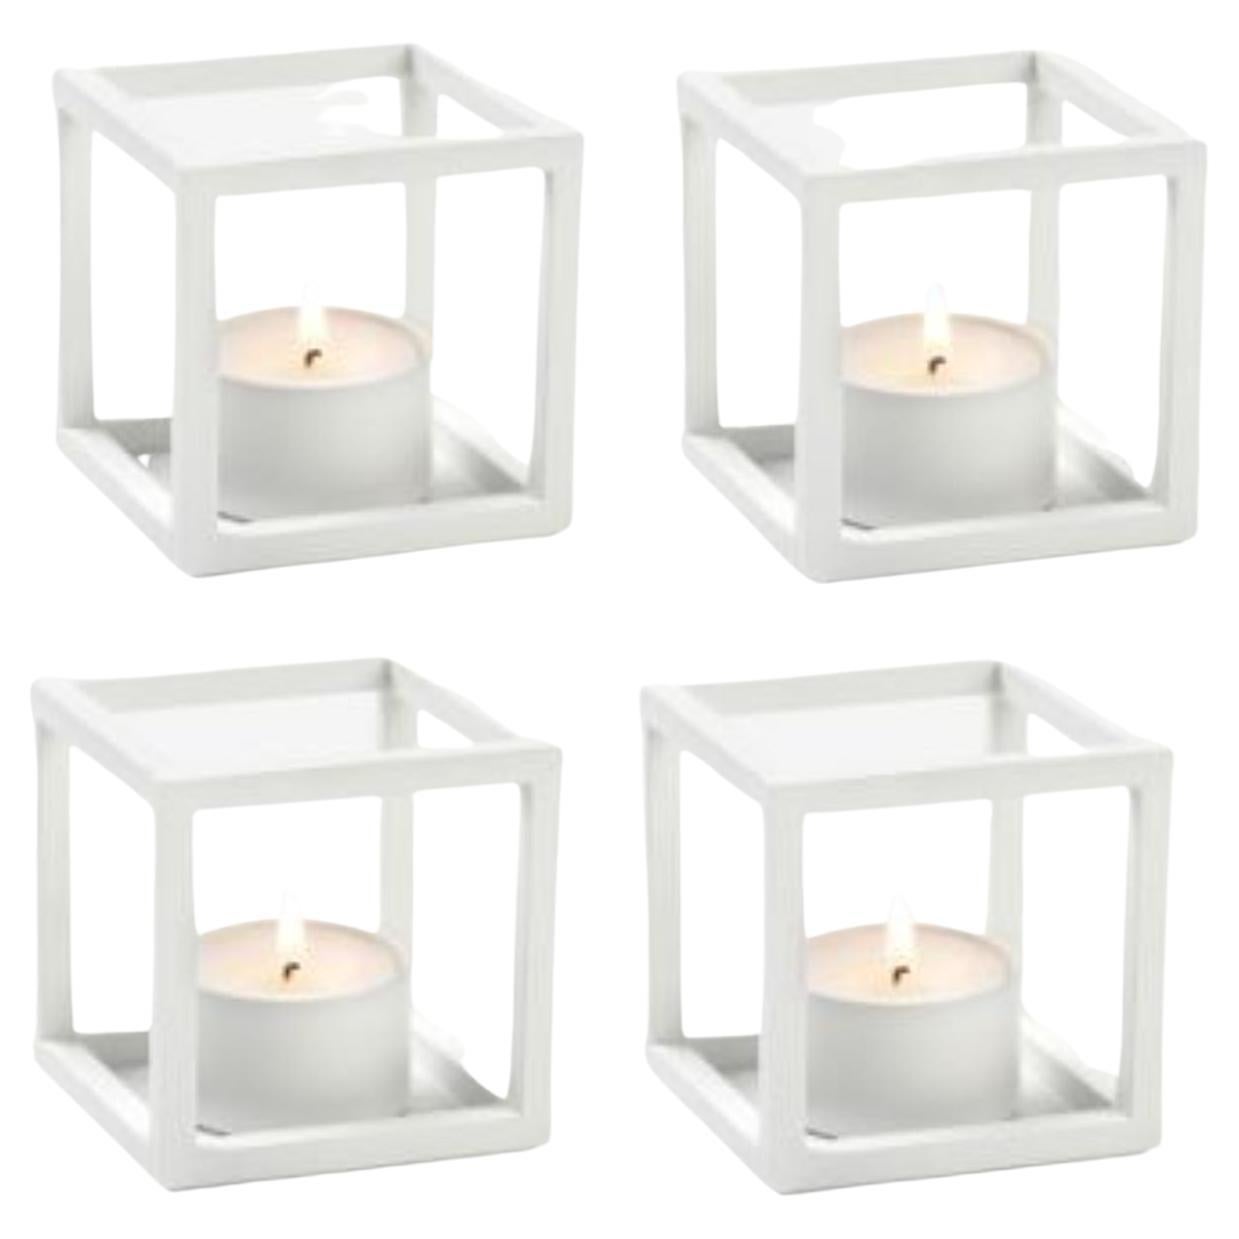 Set of 4 White Kubus T Candle Holders by Lassen